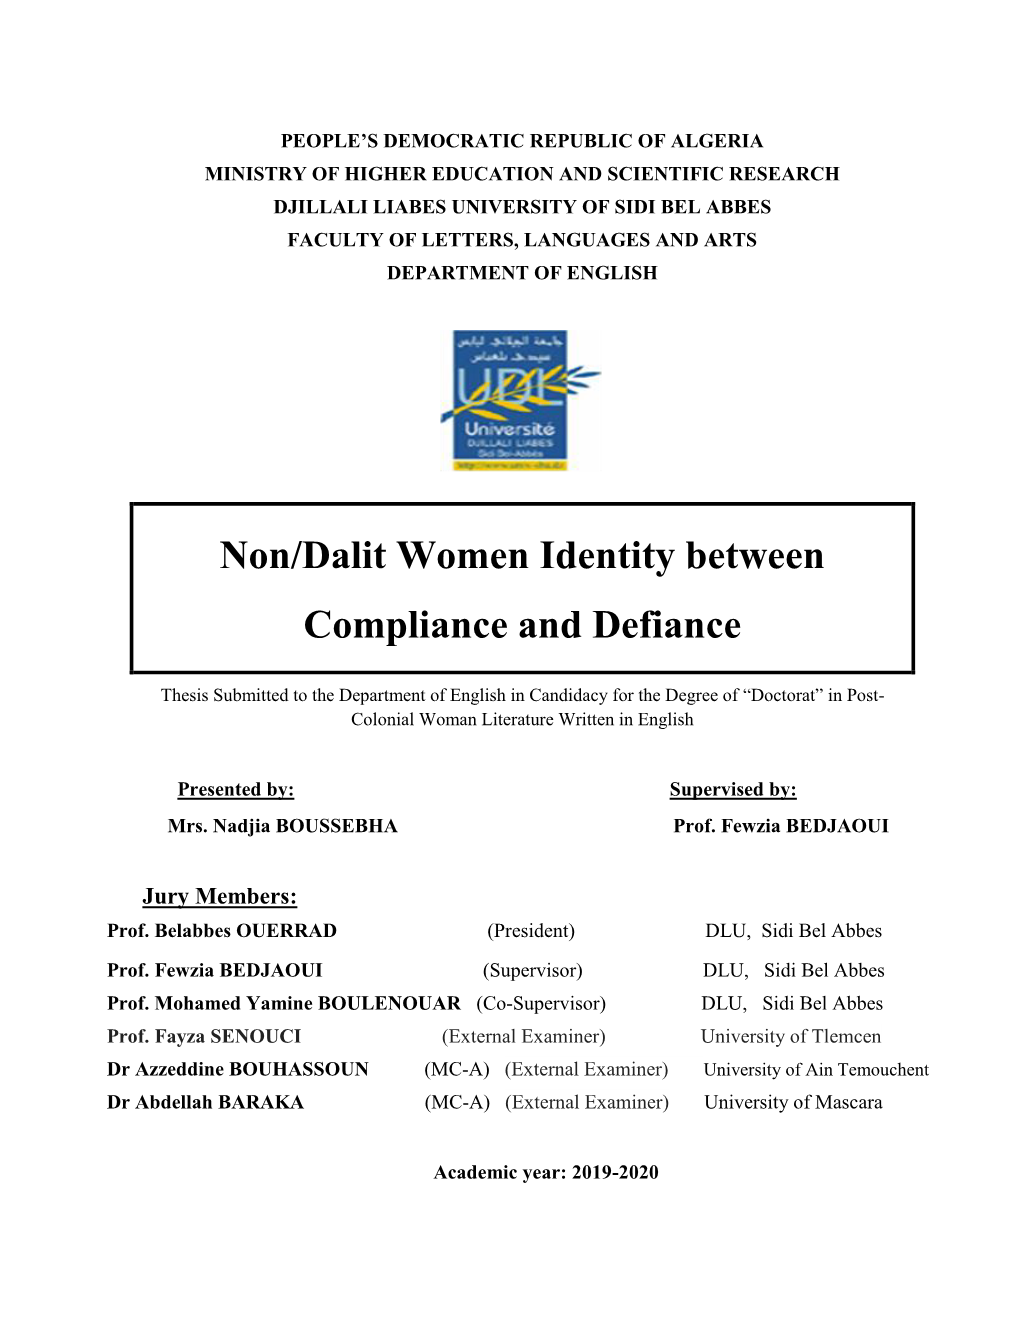 Non/Dalit Women Identity Between Compliance and Defiance